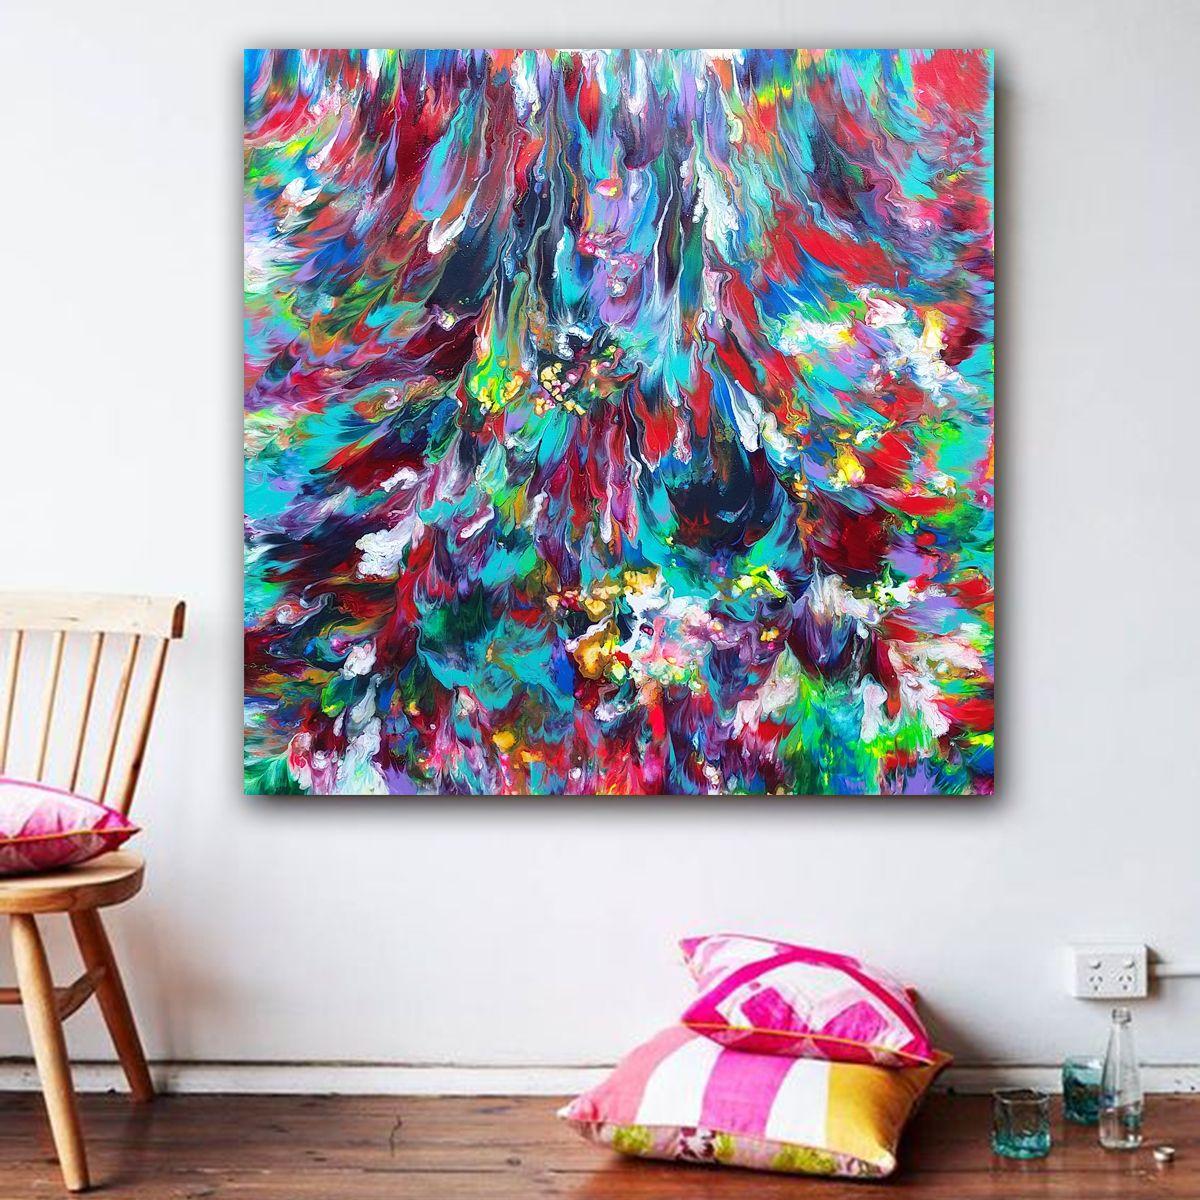 Good Karma is a vibrant abstract acrylic painting that exudes positive energy. This painting will make you smile when you look at it and brings good karma to your home.    Title: Good Karma  Size: 30